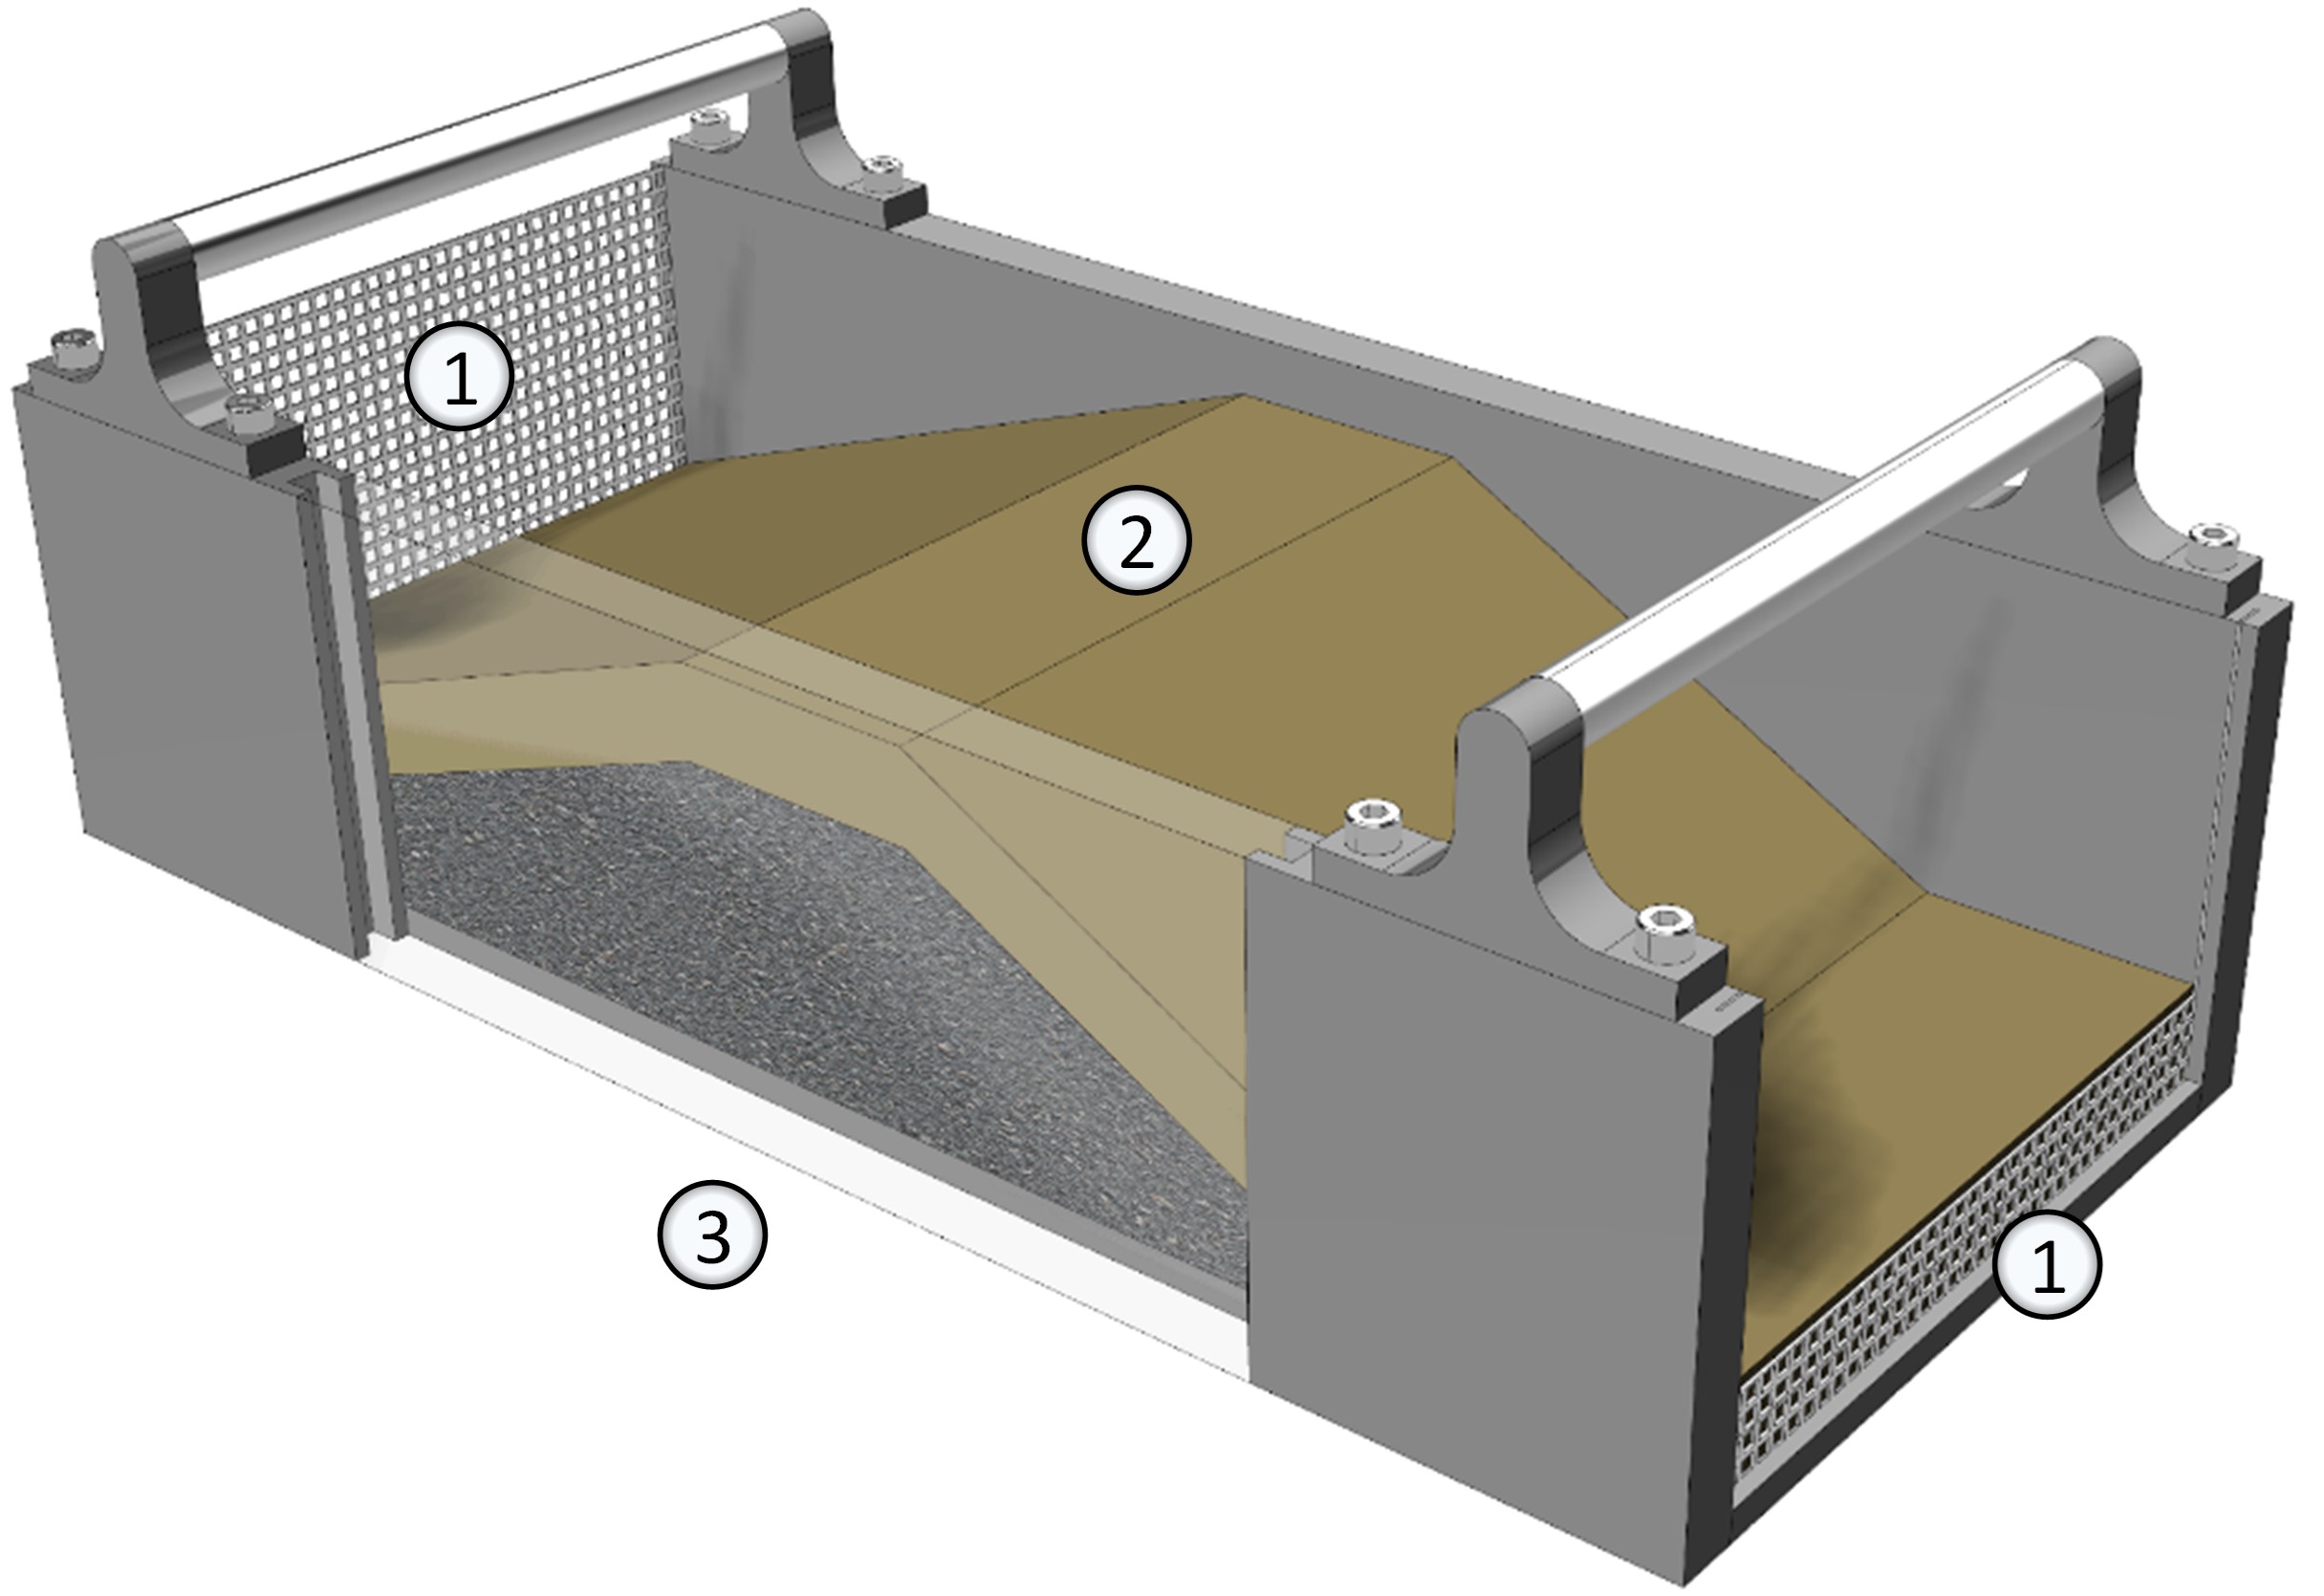 Removable model box. Perforated ends (1) allow for saturation of the model and transmission of pore pressures through the boundaries. The model space (2) is of 40 cm in length and 28 cm in width, with space for models of 20 cm depth. Perspex window